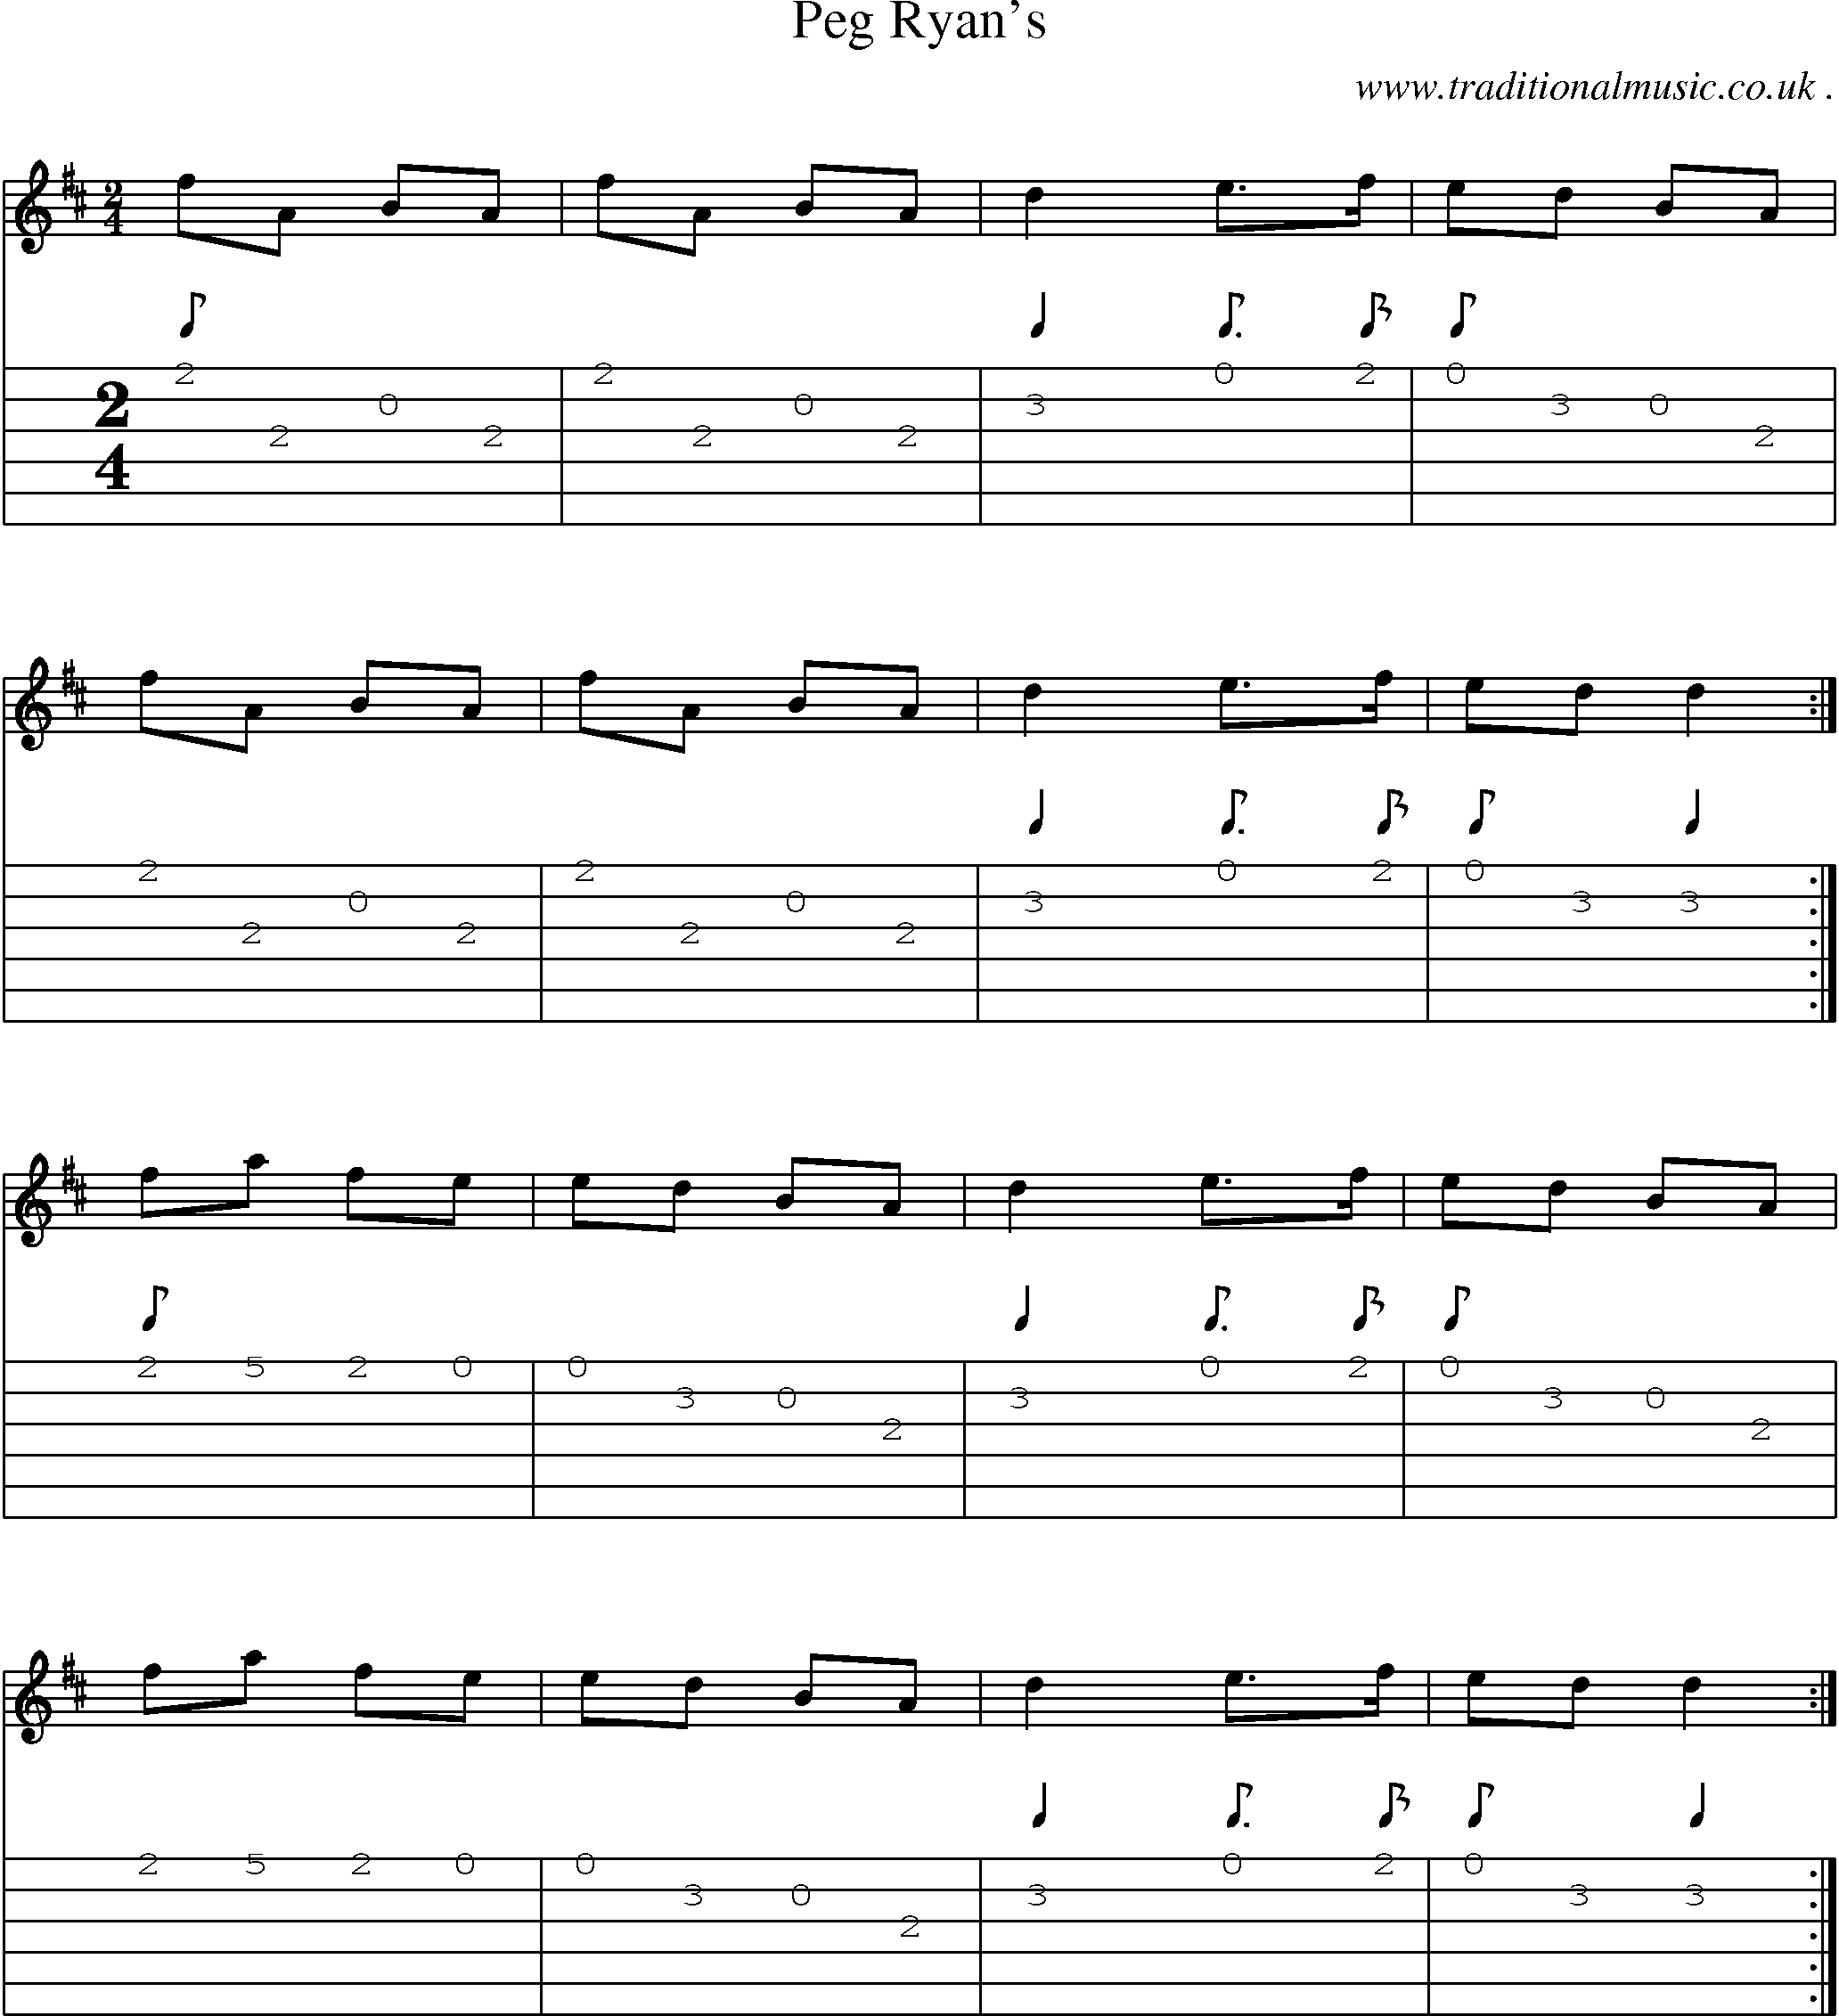 Sheet-Music and Guitar Tabs for Peg Ryans